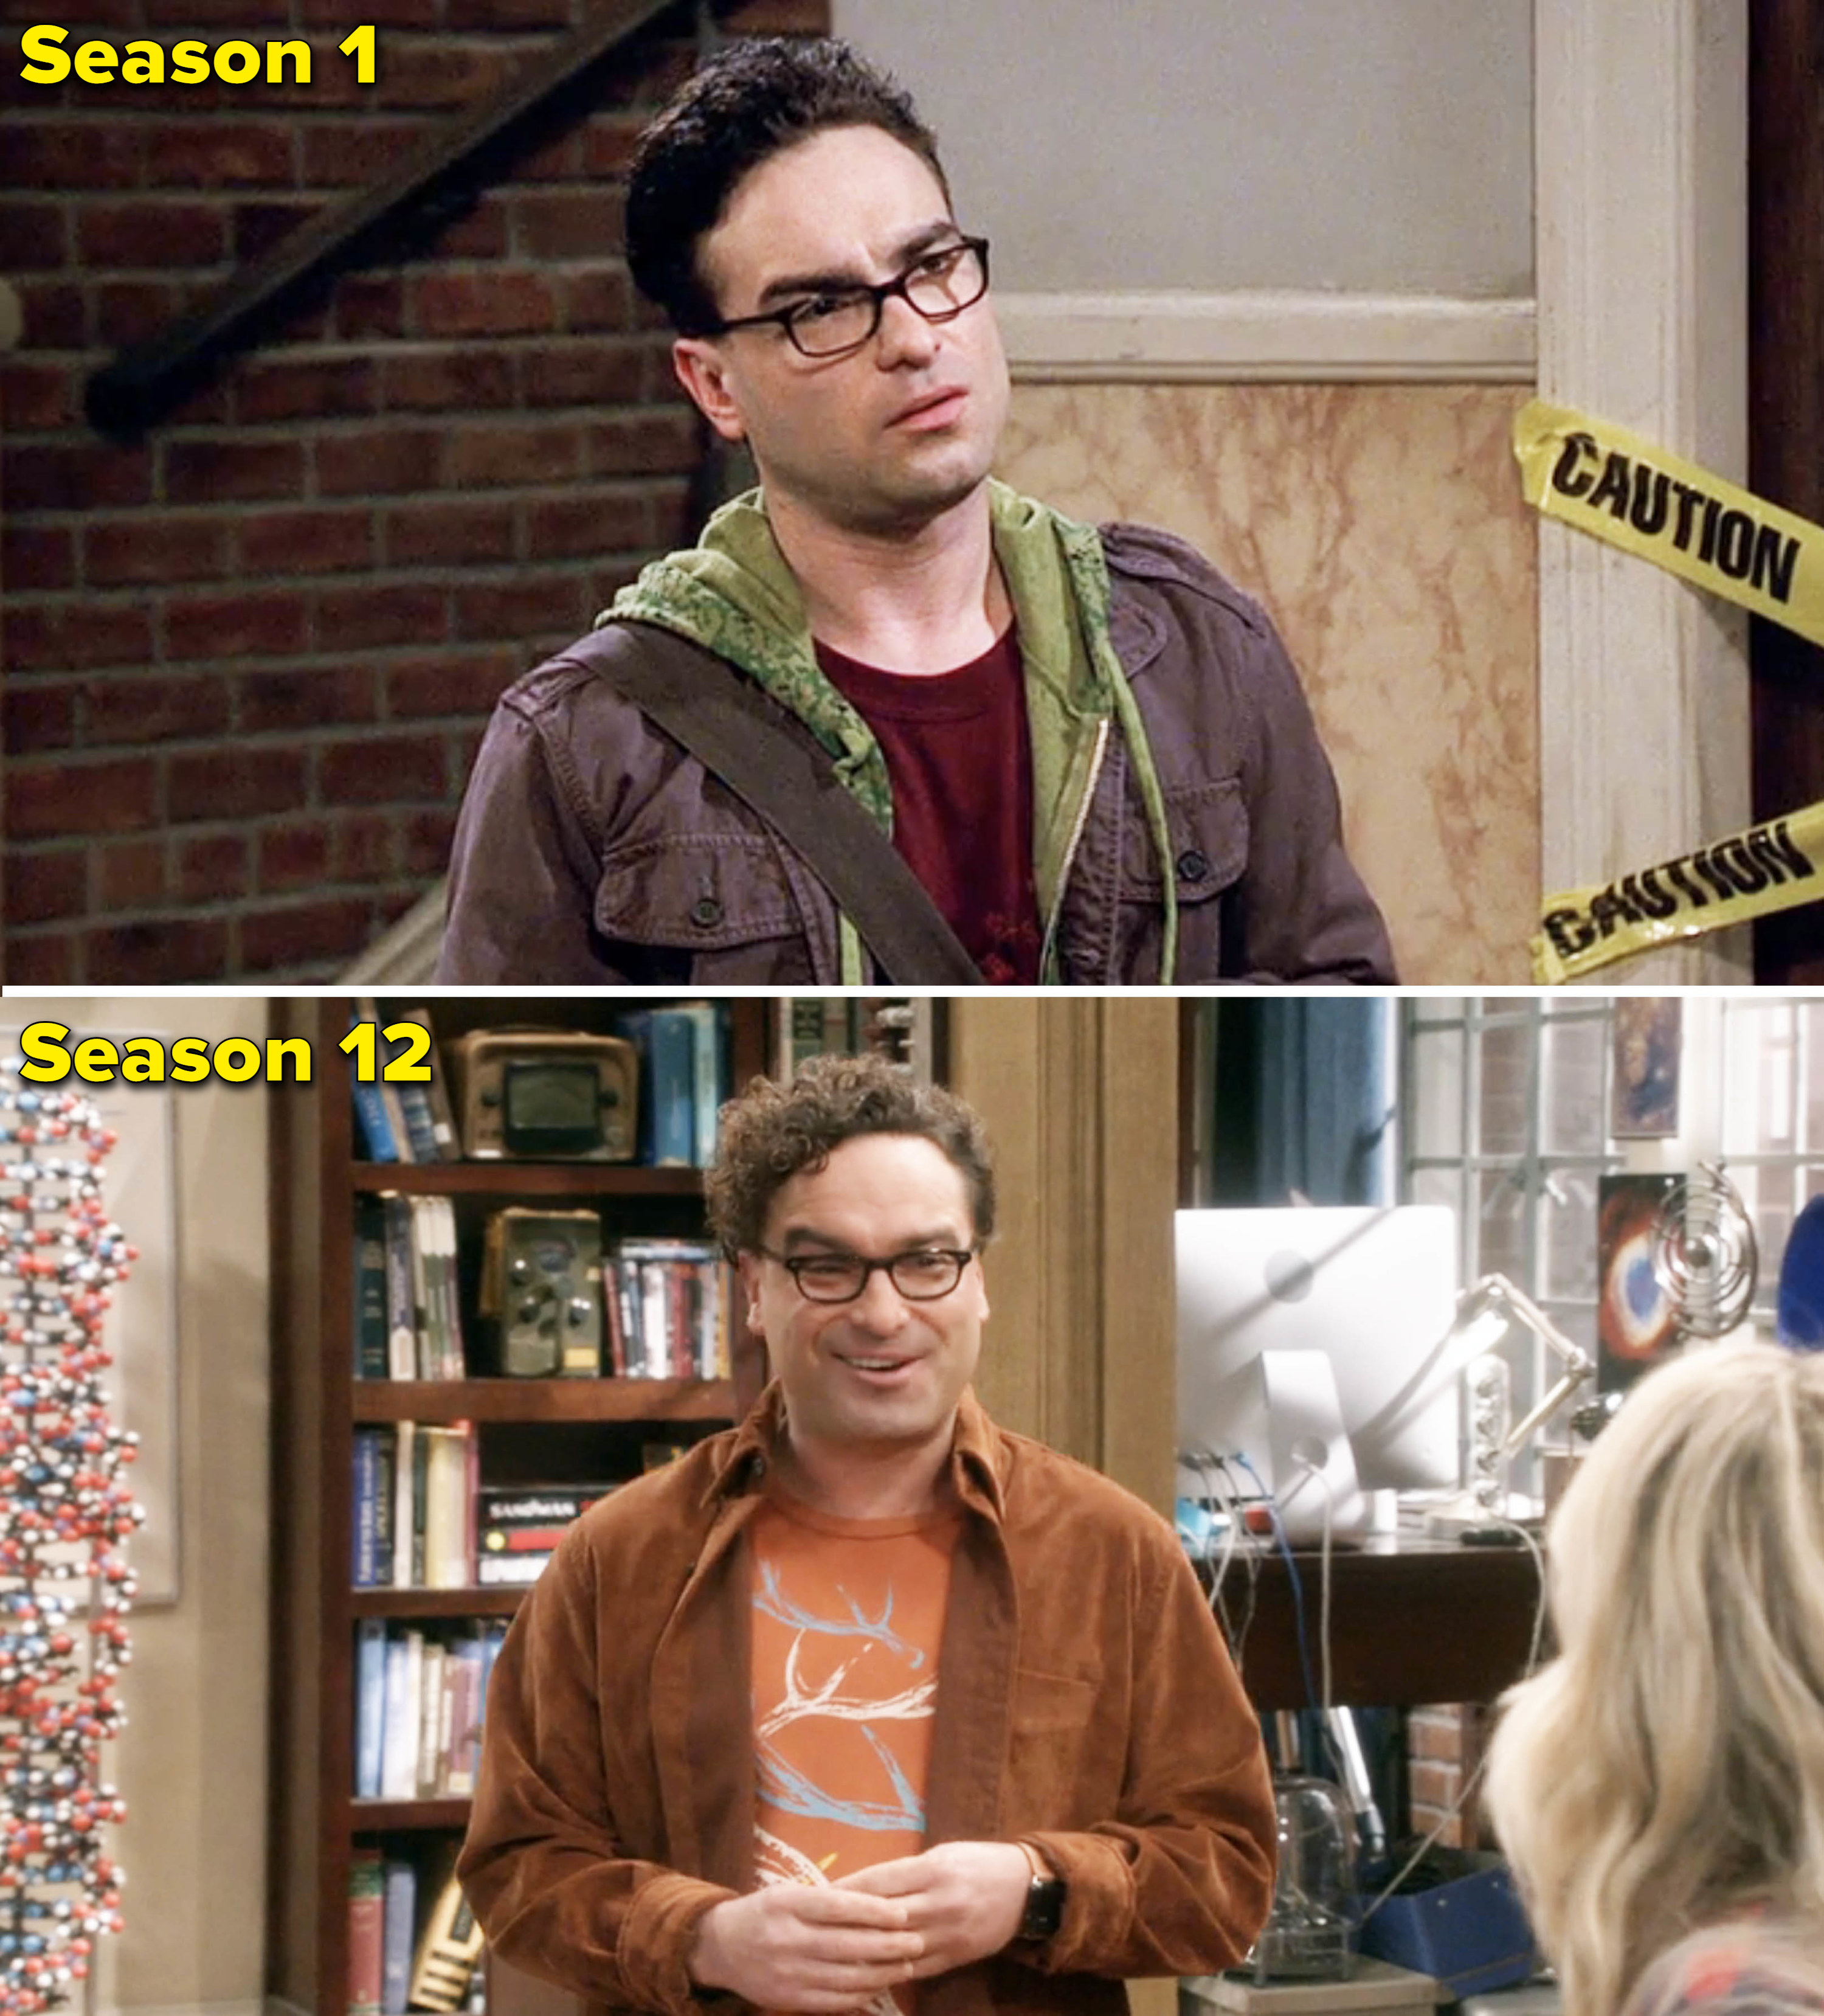 Johnny in seasons 1 and 2